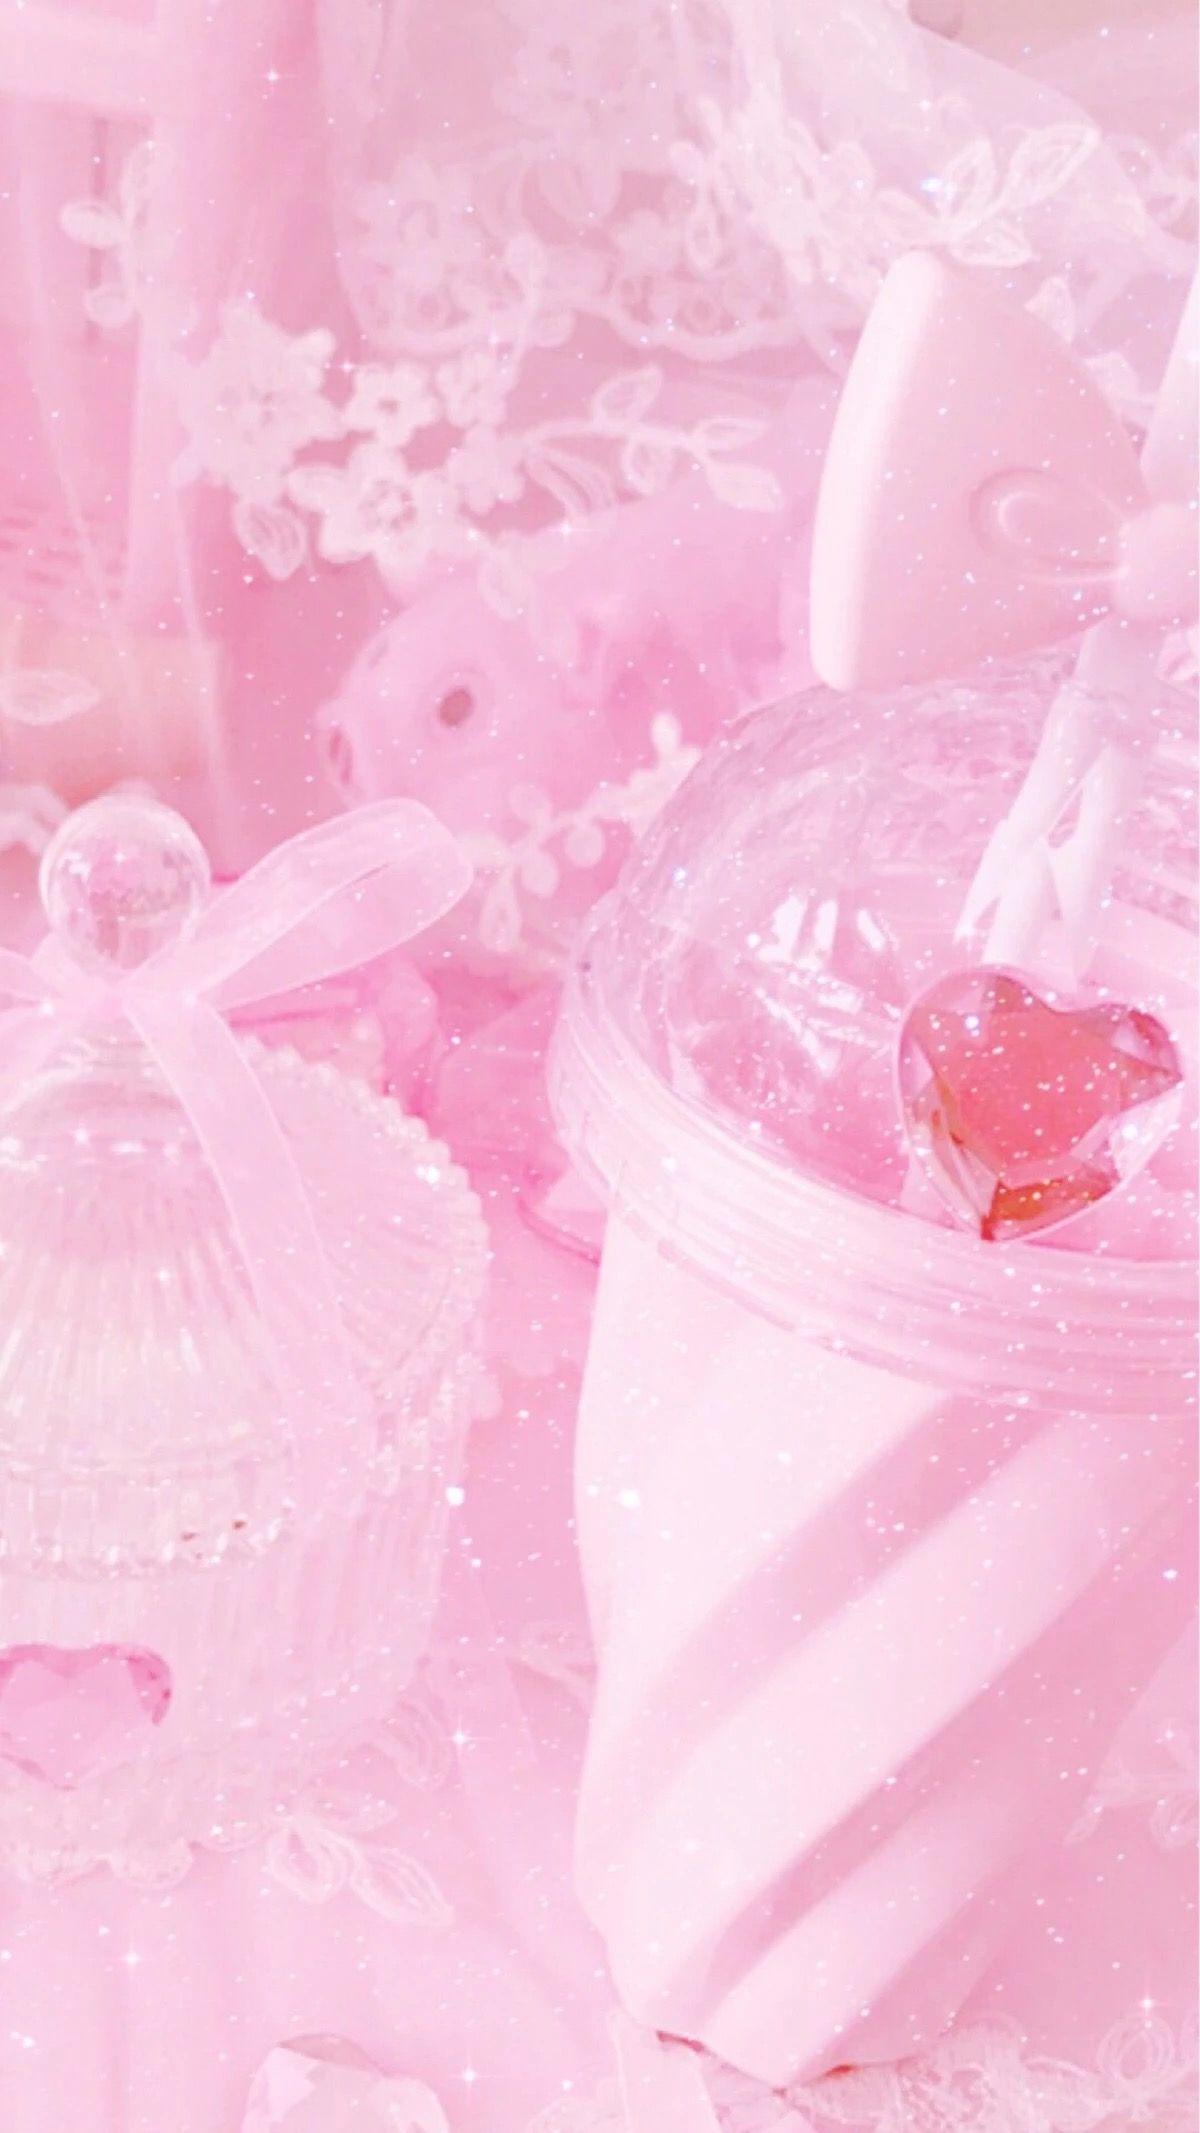 Pink Aesthetic Background Wallpaper / Cool Aesthetic Pics 1080p